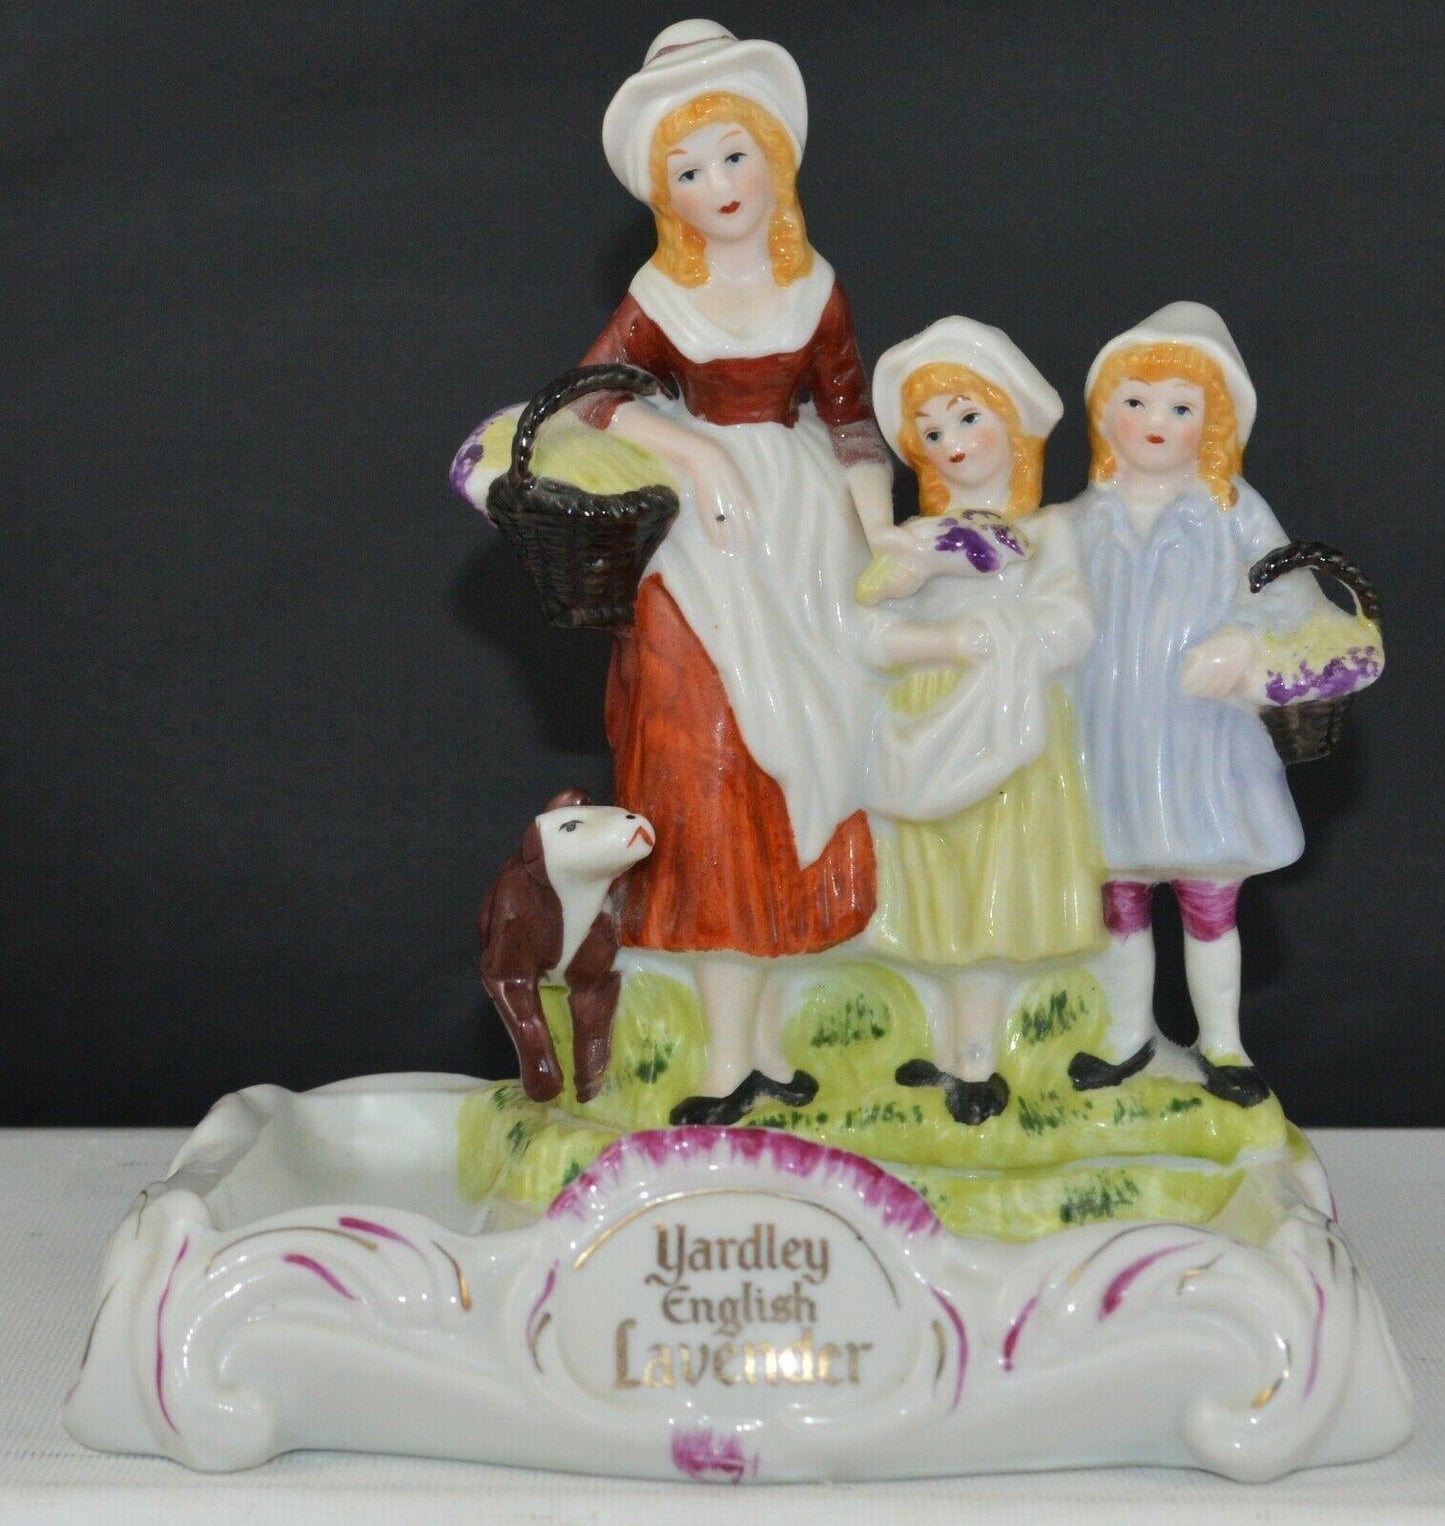 VINTAGE YARDLEY ENGLISH LAVENDER SOAP DISH MOTHER AND CHILDREN DESIGN(PREVIOUSLY OWNED) V.G.C - TMD167207